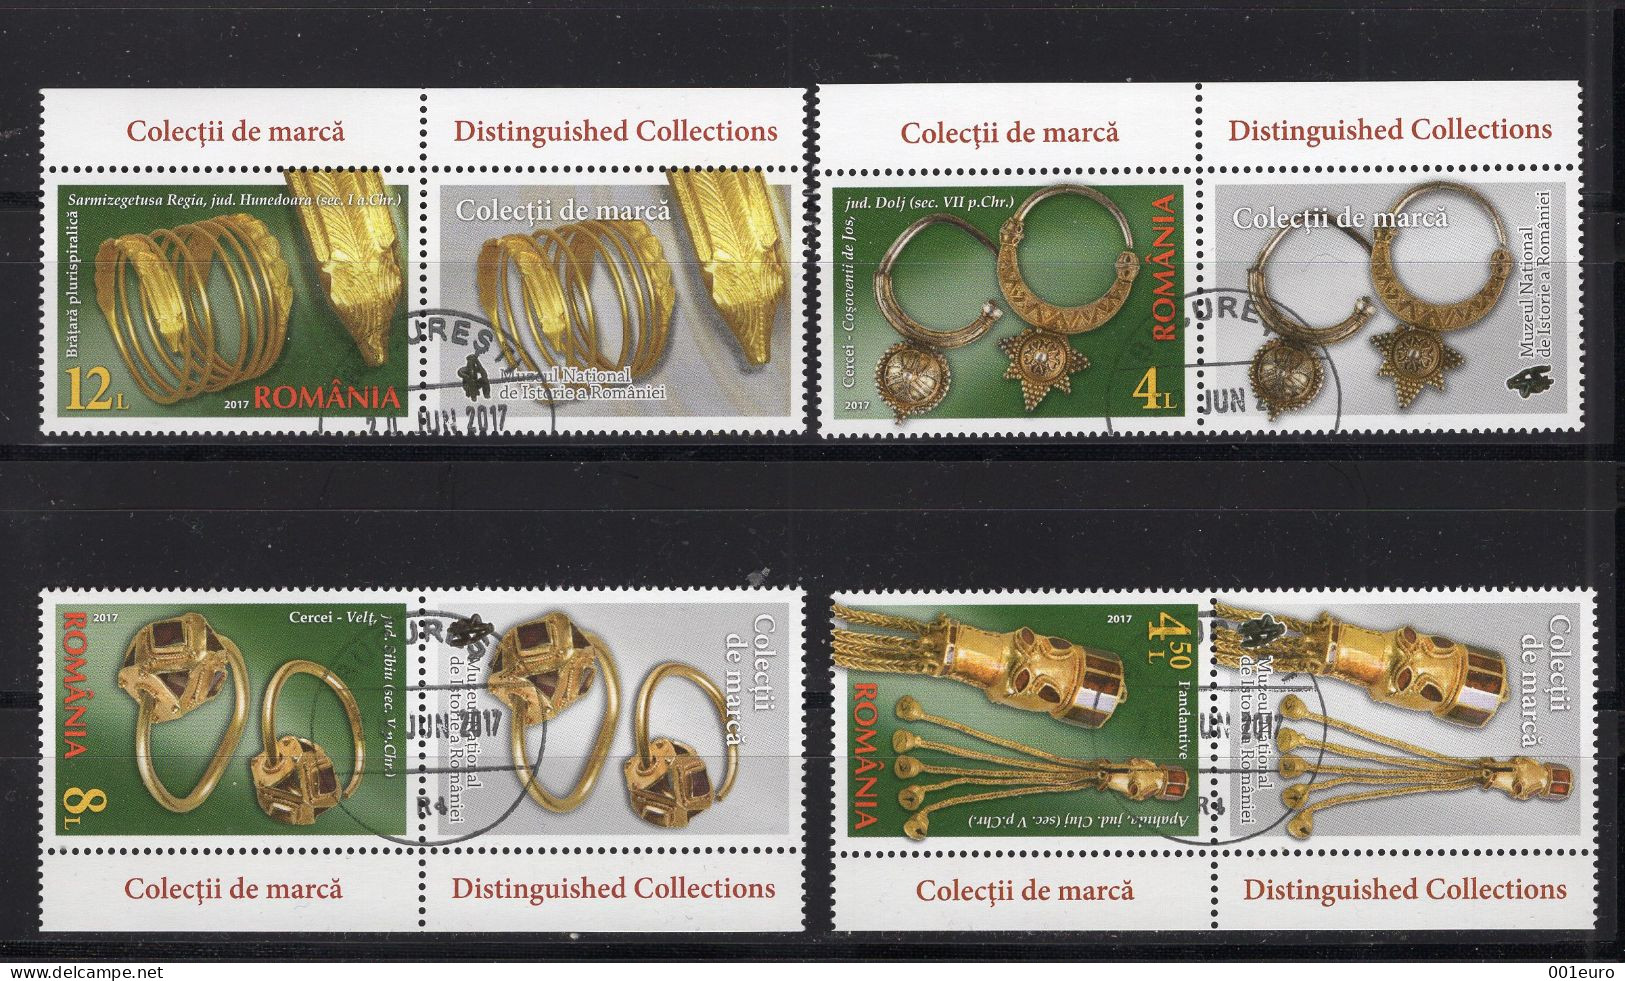 ROMANIA 2017: DISTINGUISHED COLLECTIONS, Set Of 4 Used Stamps + Vignettes - Registered Shipping! - Used Stamps